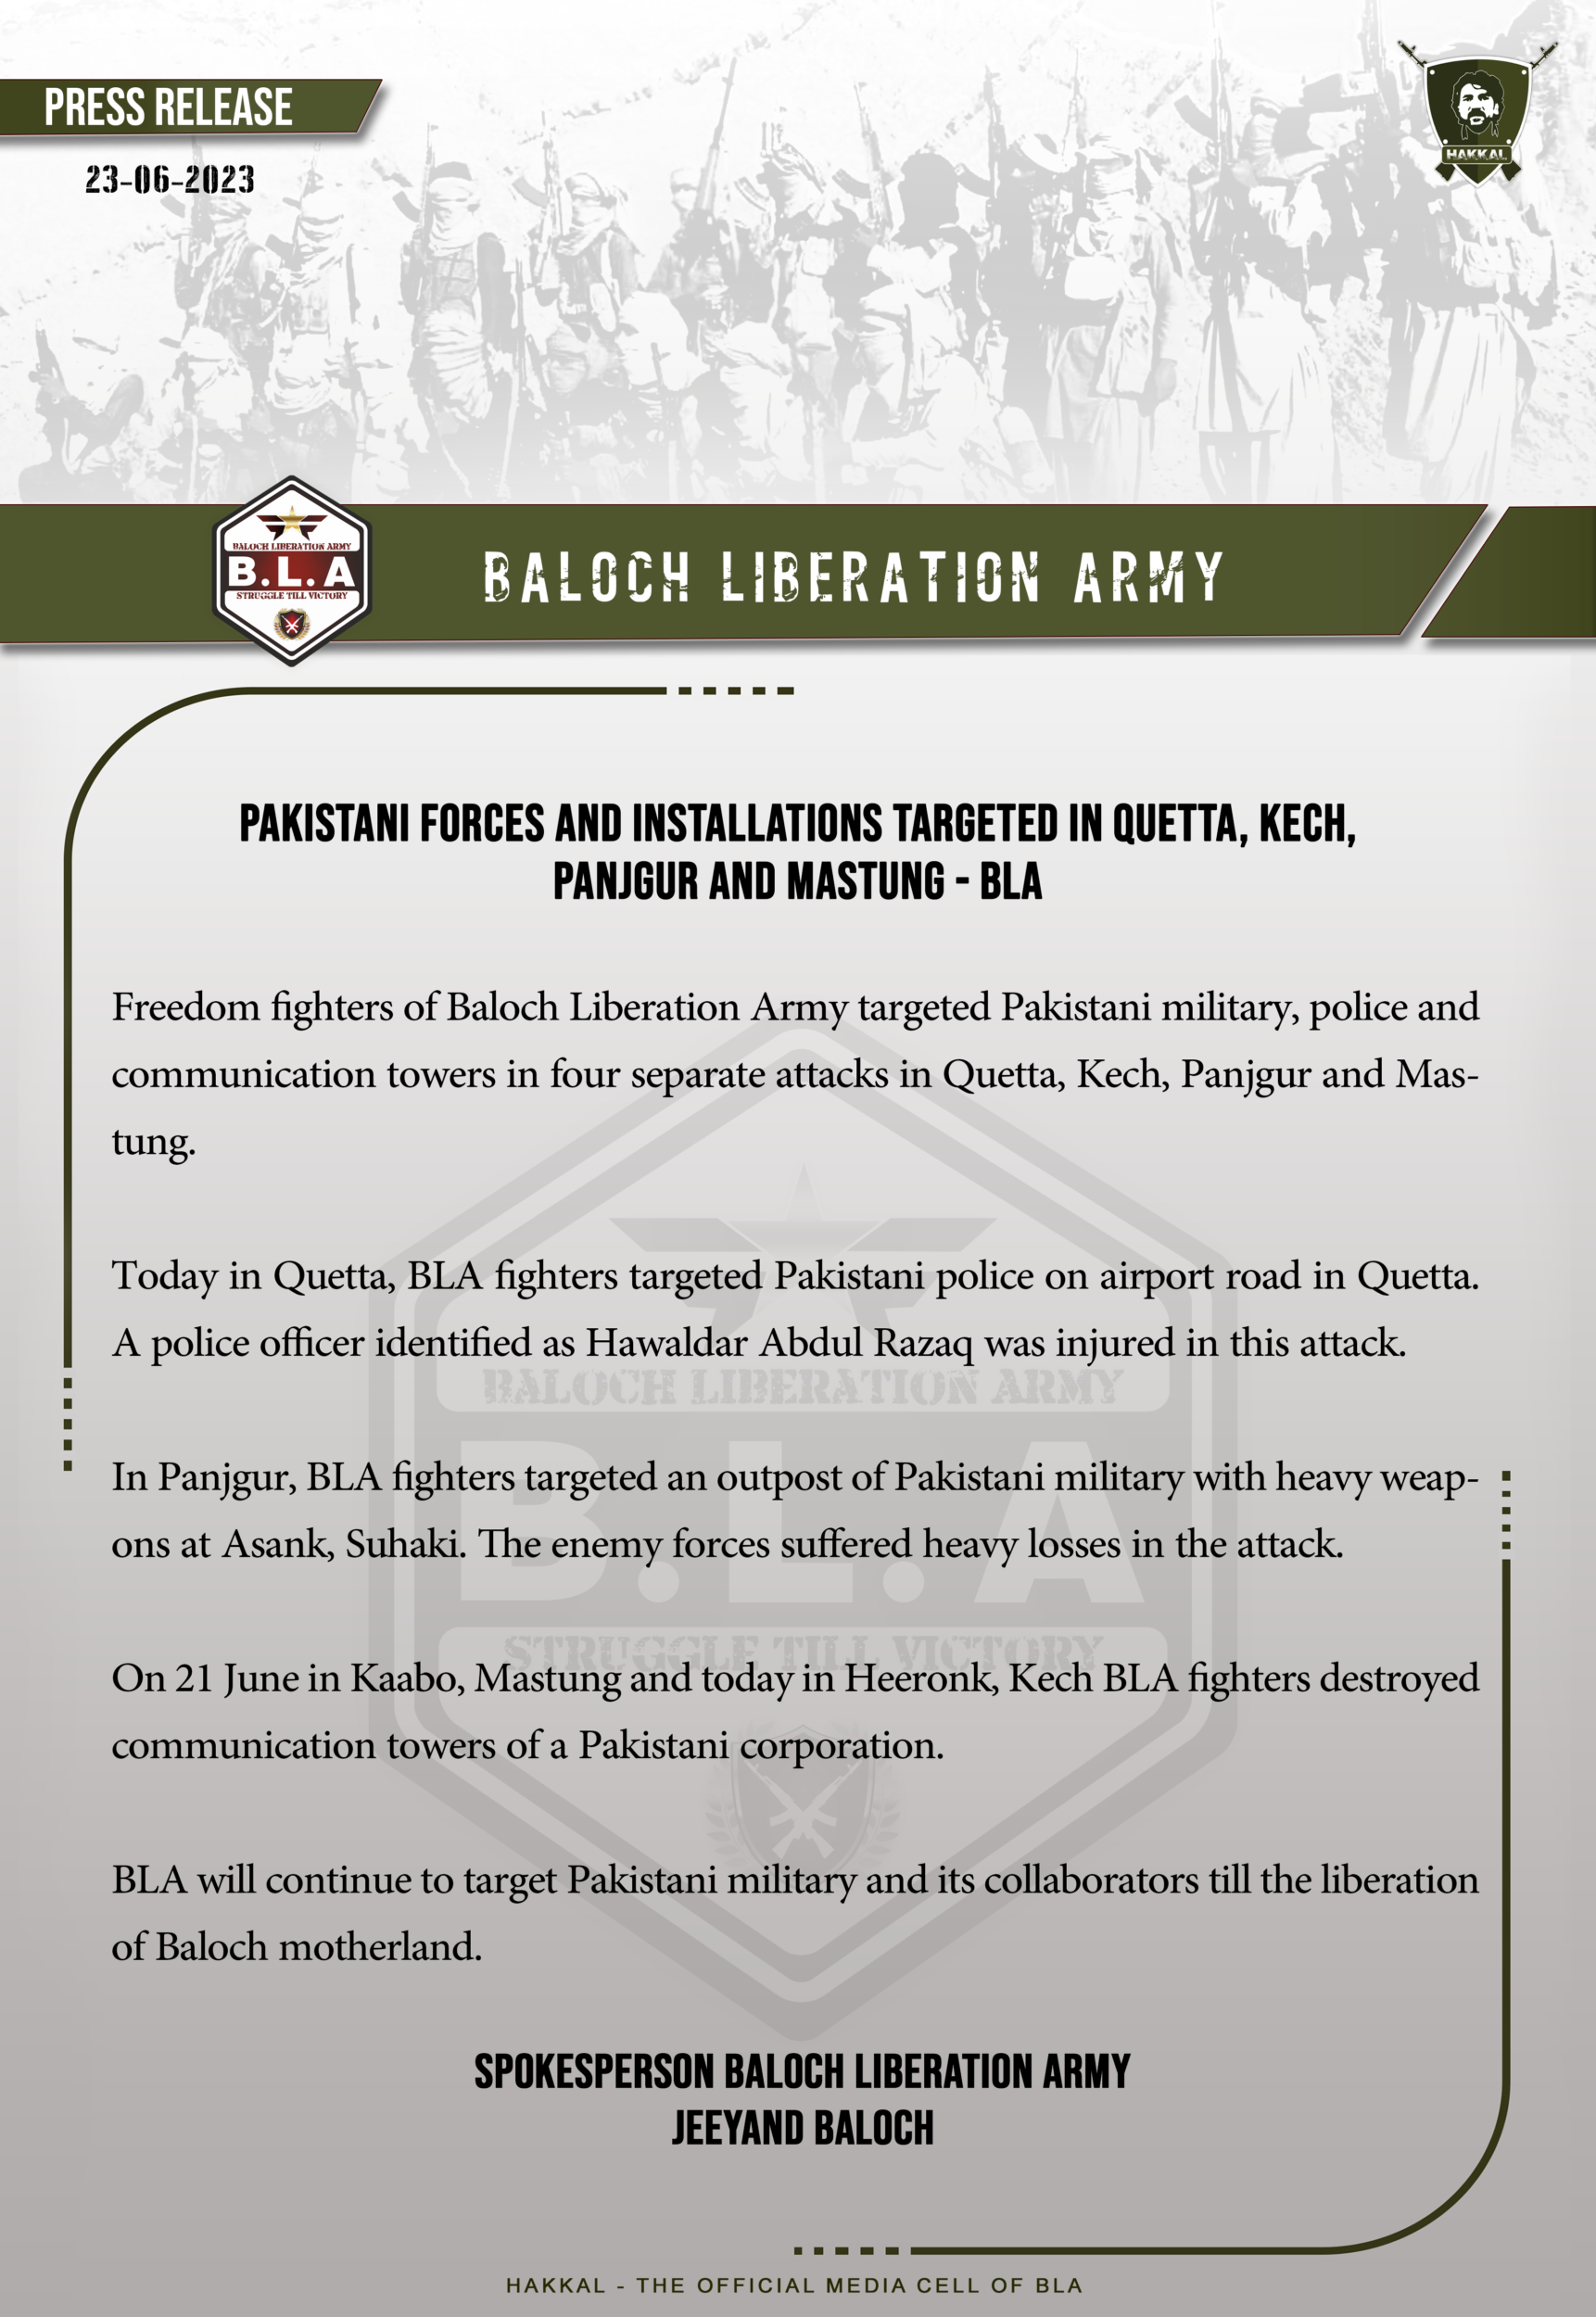 (Claim) Baloch Liberation Army (BLA) Targeted Pakistani Forces and Installation in Quetta, Kech, Panjgur and Mastung, Balochistan, Pakistan – 23 June 2023